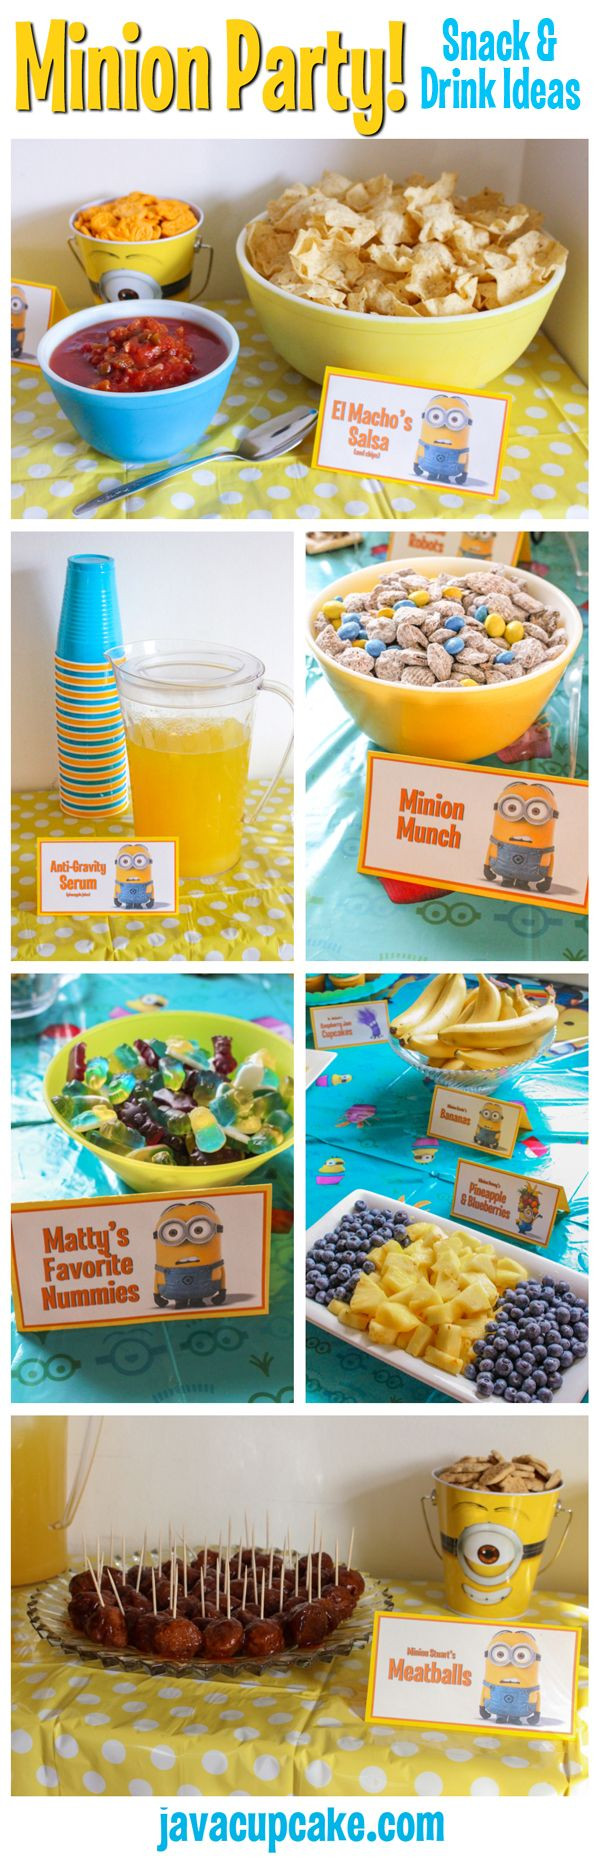 Despicable Me Party Food Ideas
 20 Exquisite Birthday Party Ideas For Little Girls